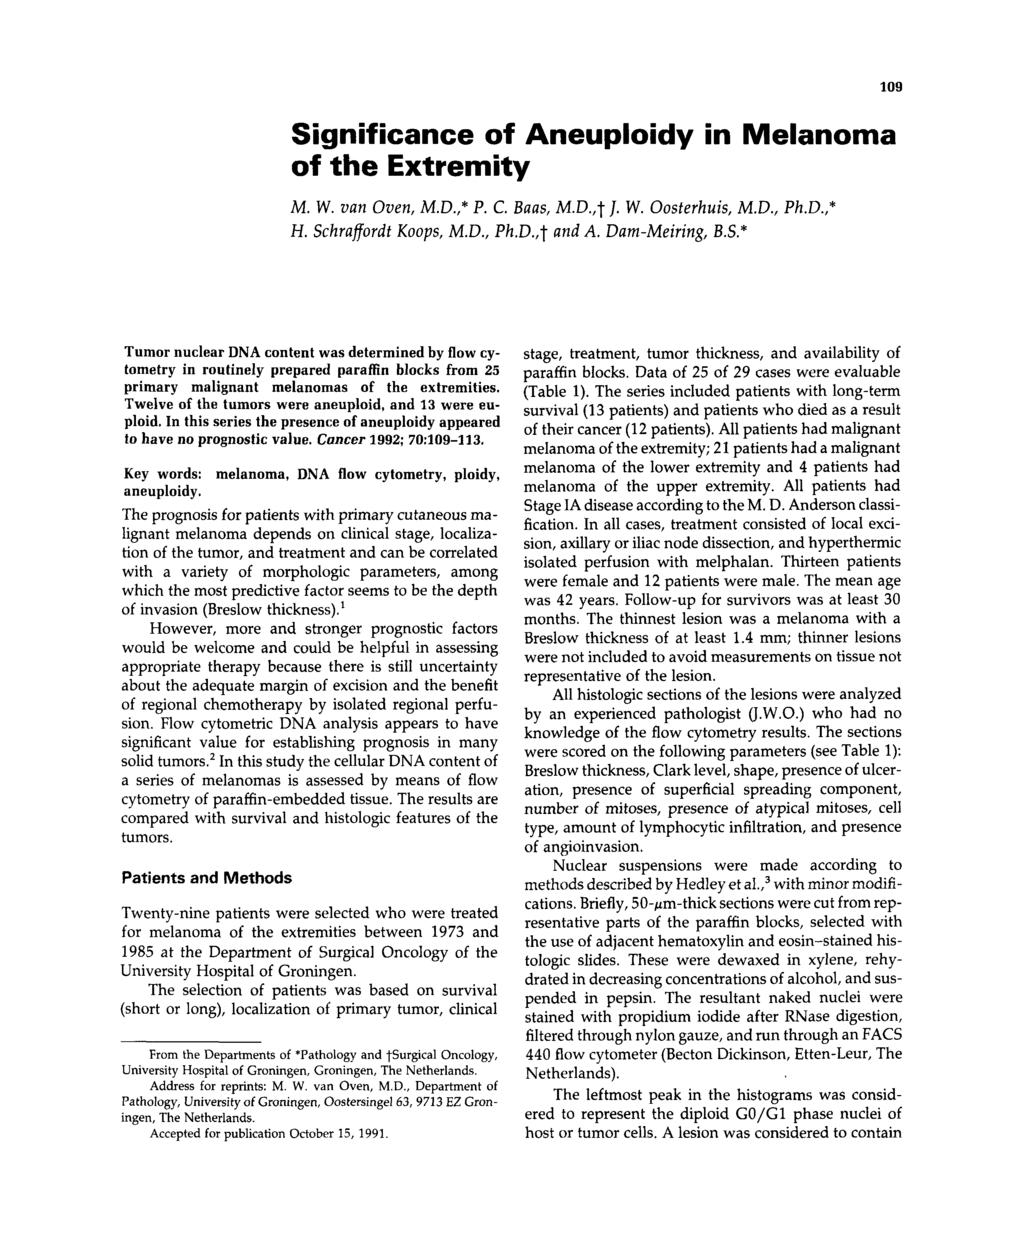 Significance of Aneuploidy in elanoma of the xtremity. W. van Oven,.D.,*. C. Baas,.D.,t J. W. Oosferhuis,.D., h.d.,* H. Schraffordf Koops,.D., h.d.,t and A. Dameiring, B.S.* 09 Tumor nuclear DNA content was determined by flow cytometry in routinely prepared paraffin blocks from 2 primary malignant melanomas of the extremities.